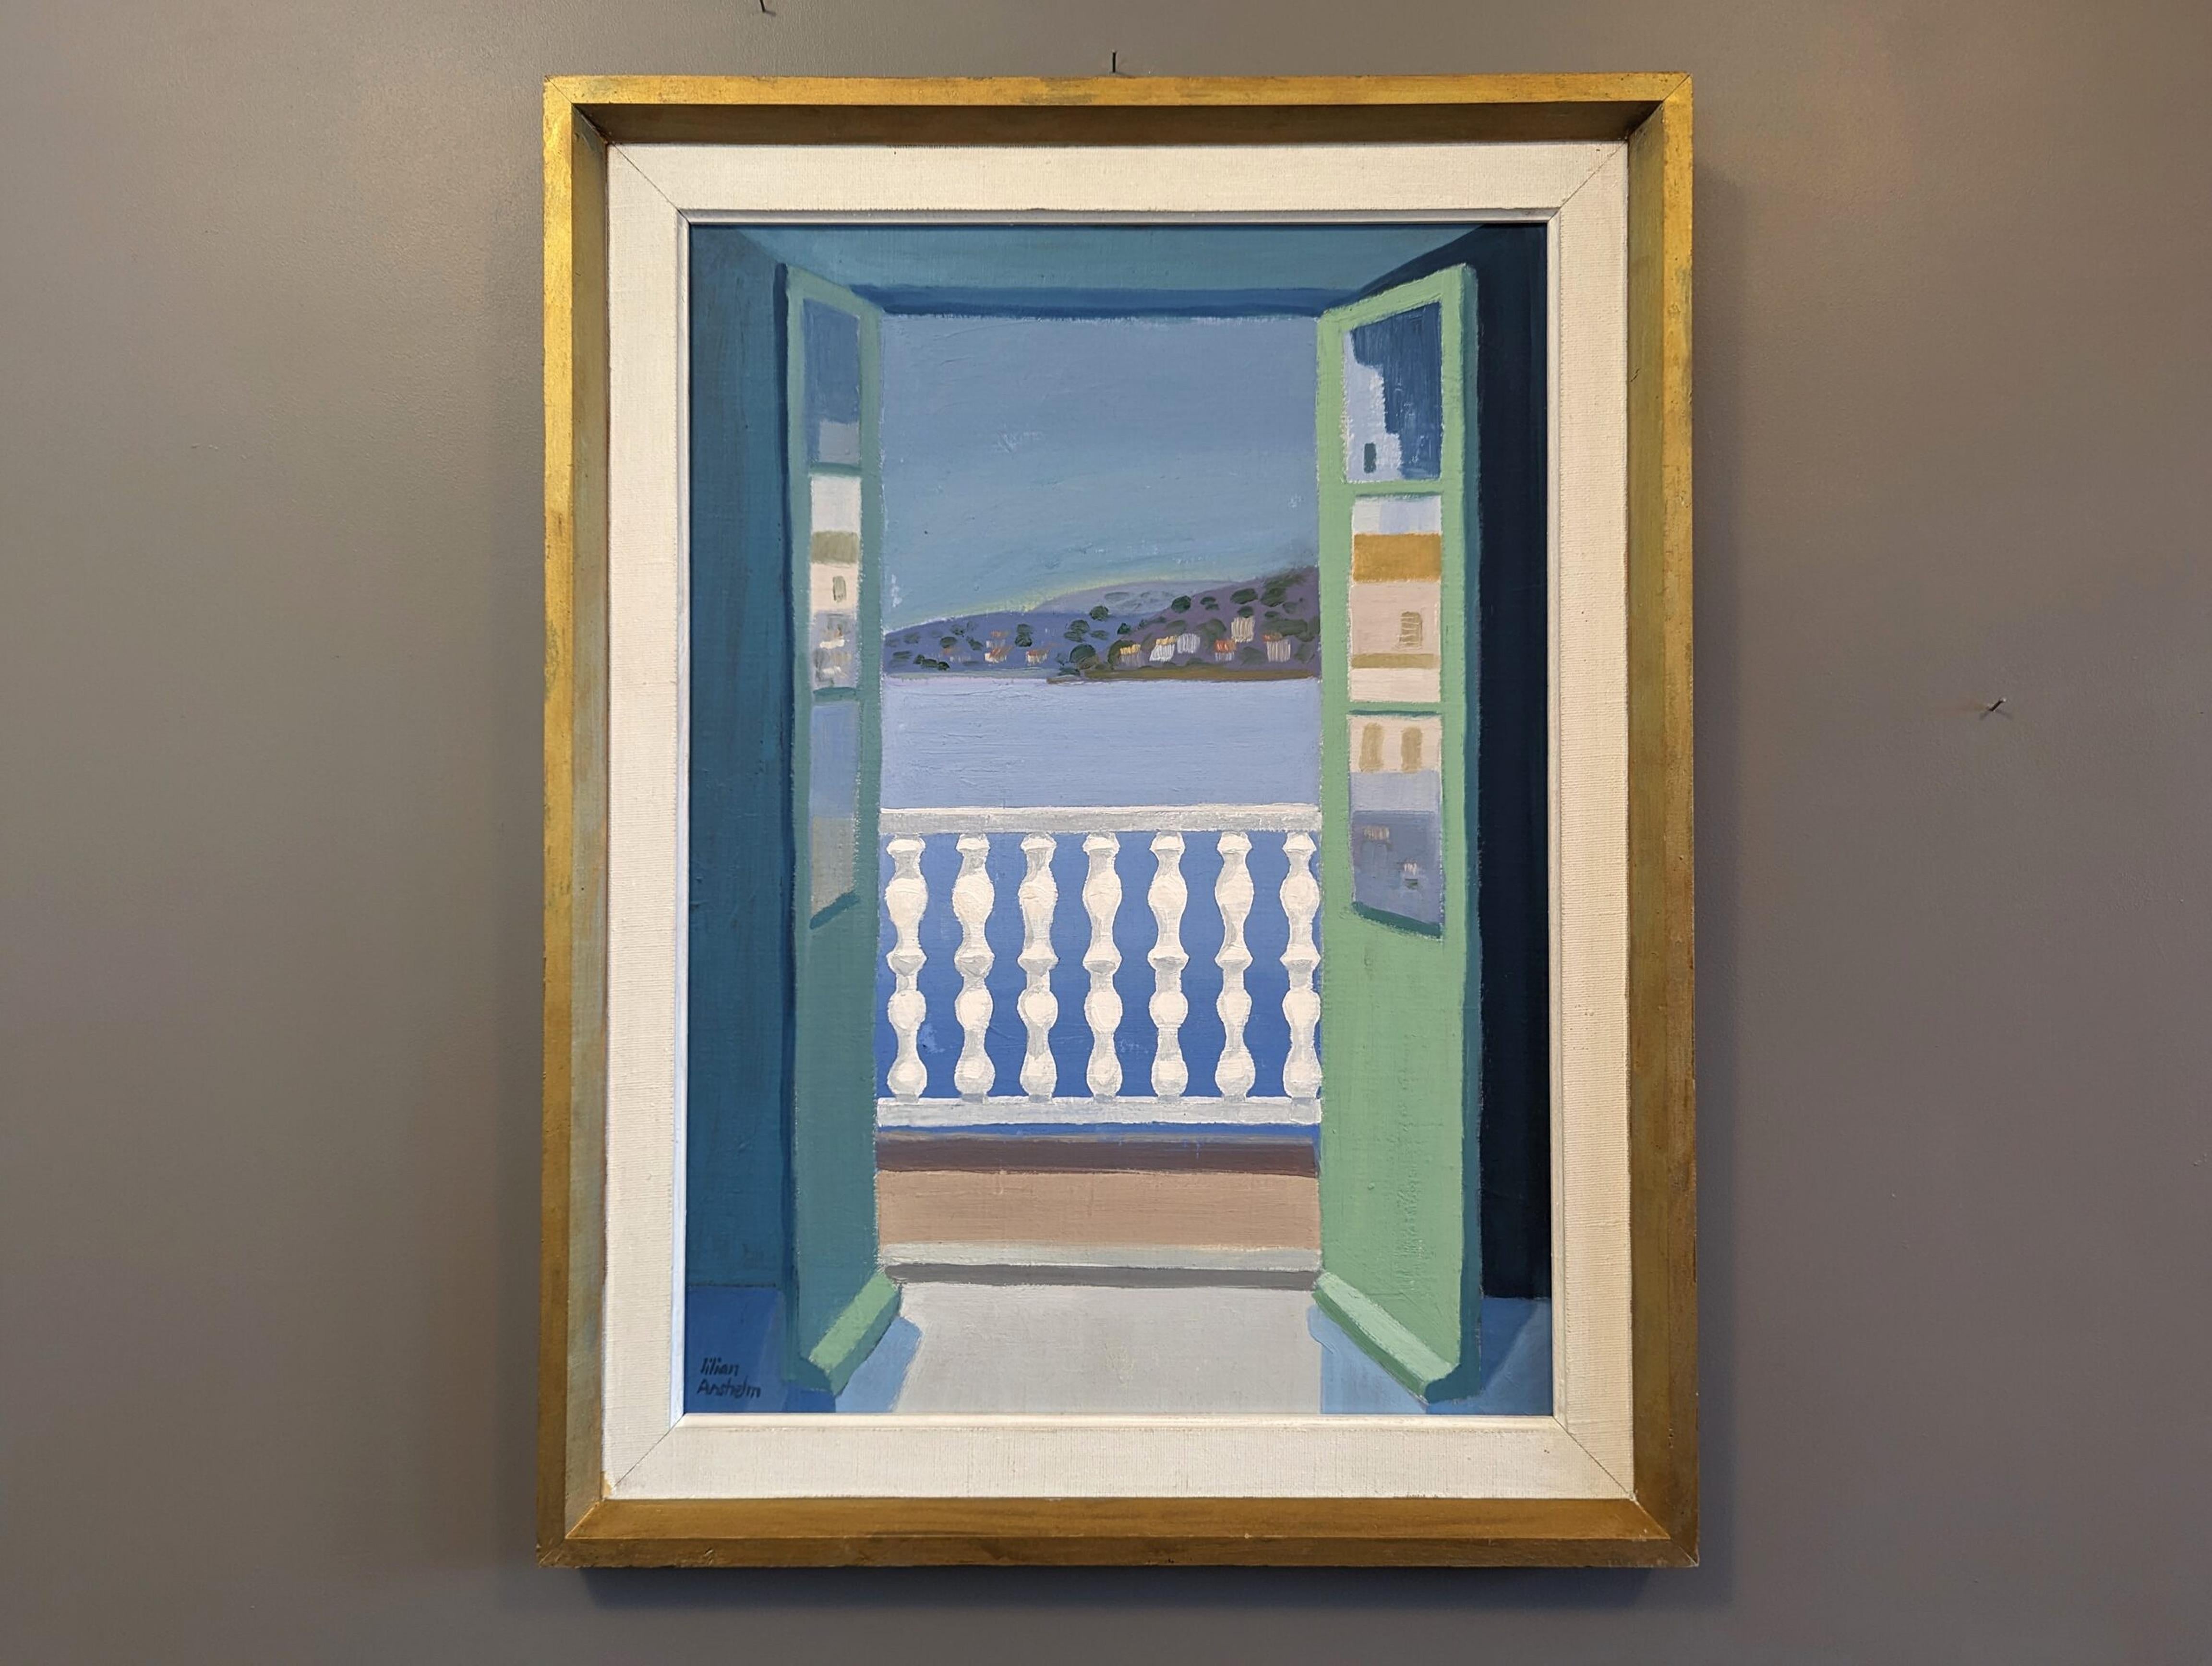 BALCONY VIEWS
Size: 65 x 50.5 cm (including frame)
Oil on Board

A charming and inviting mid-century composition, executed in oil onto board.

The painting presents an open door leading to a balcony with white balustrades. Beyond it, the expansive